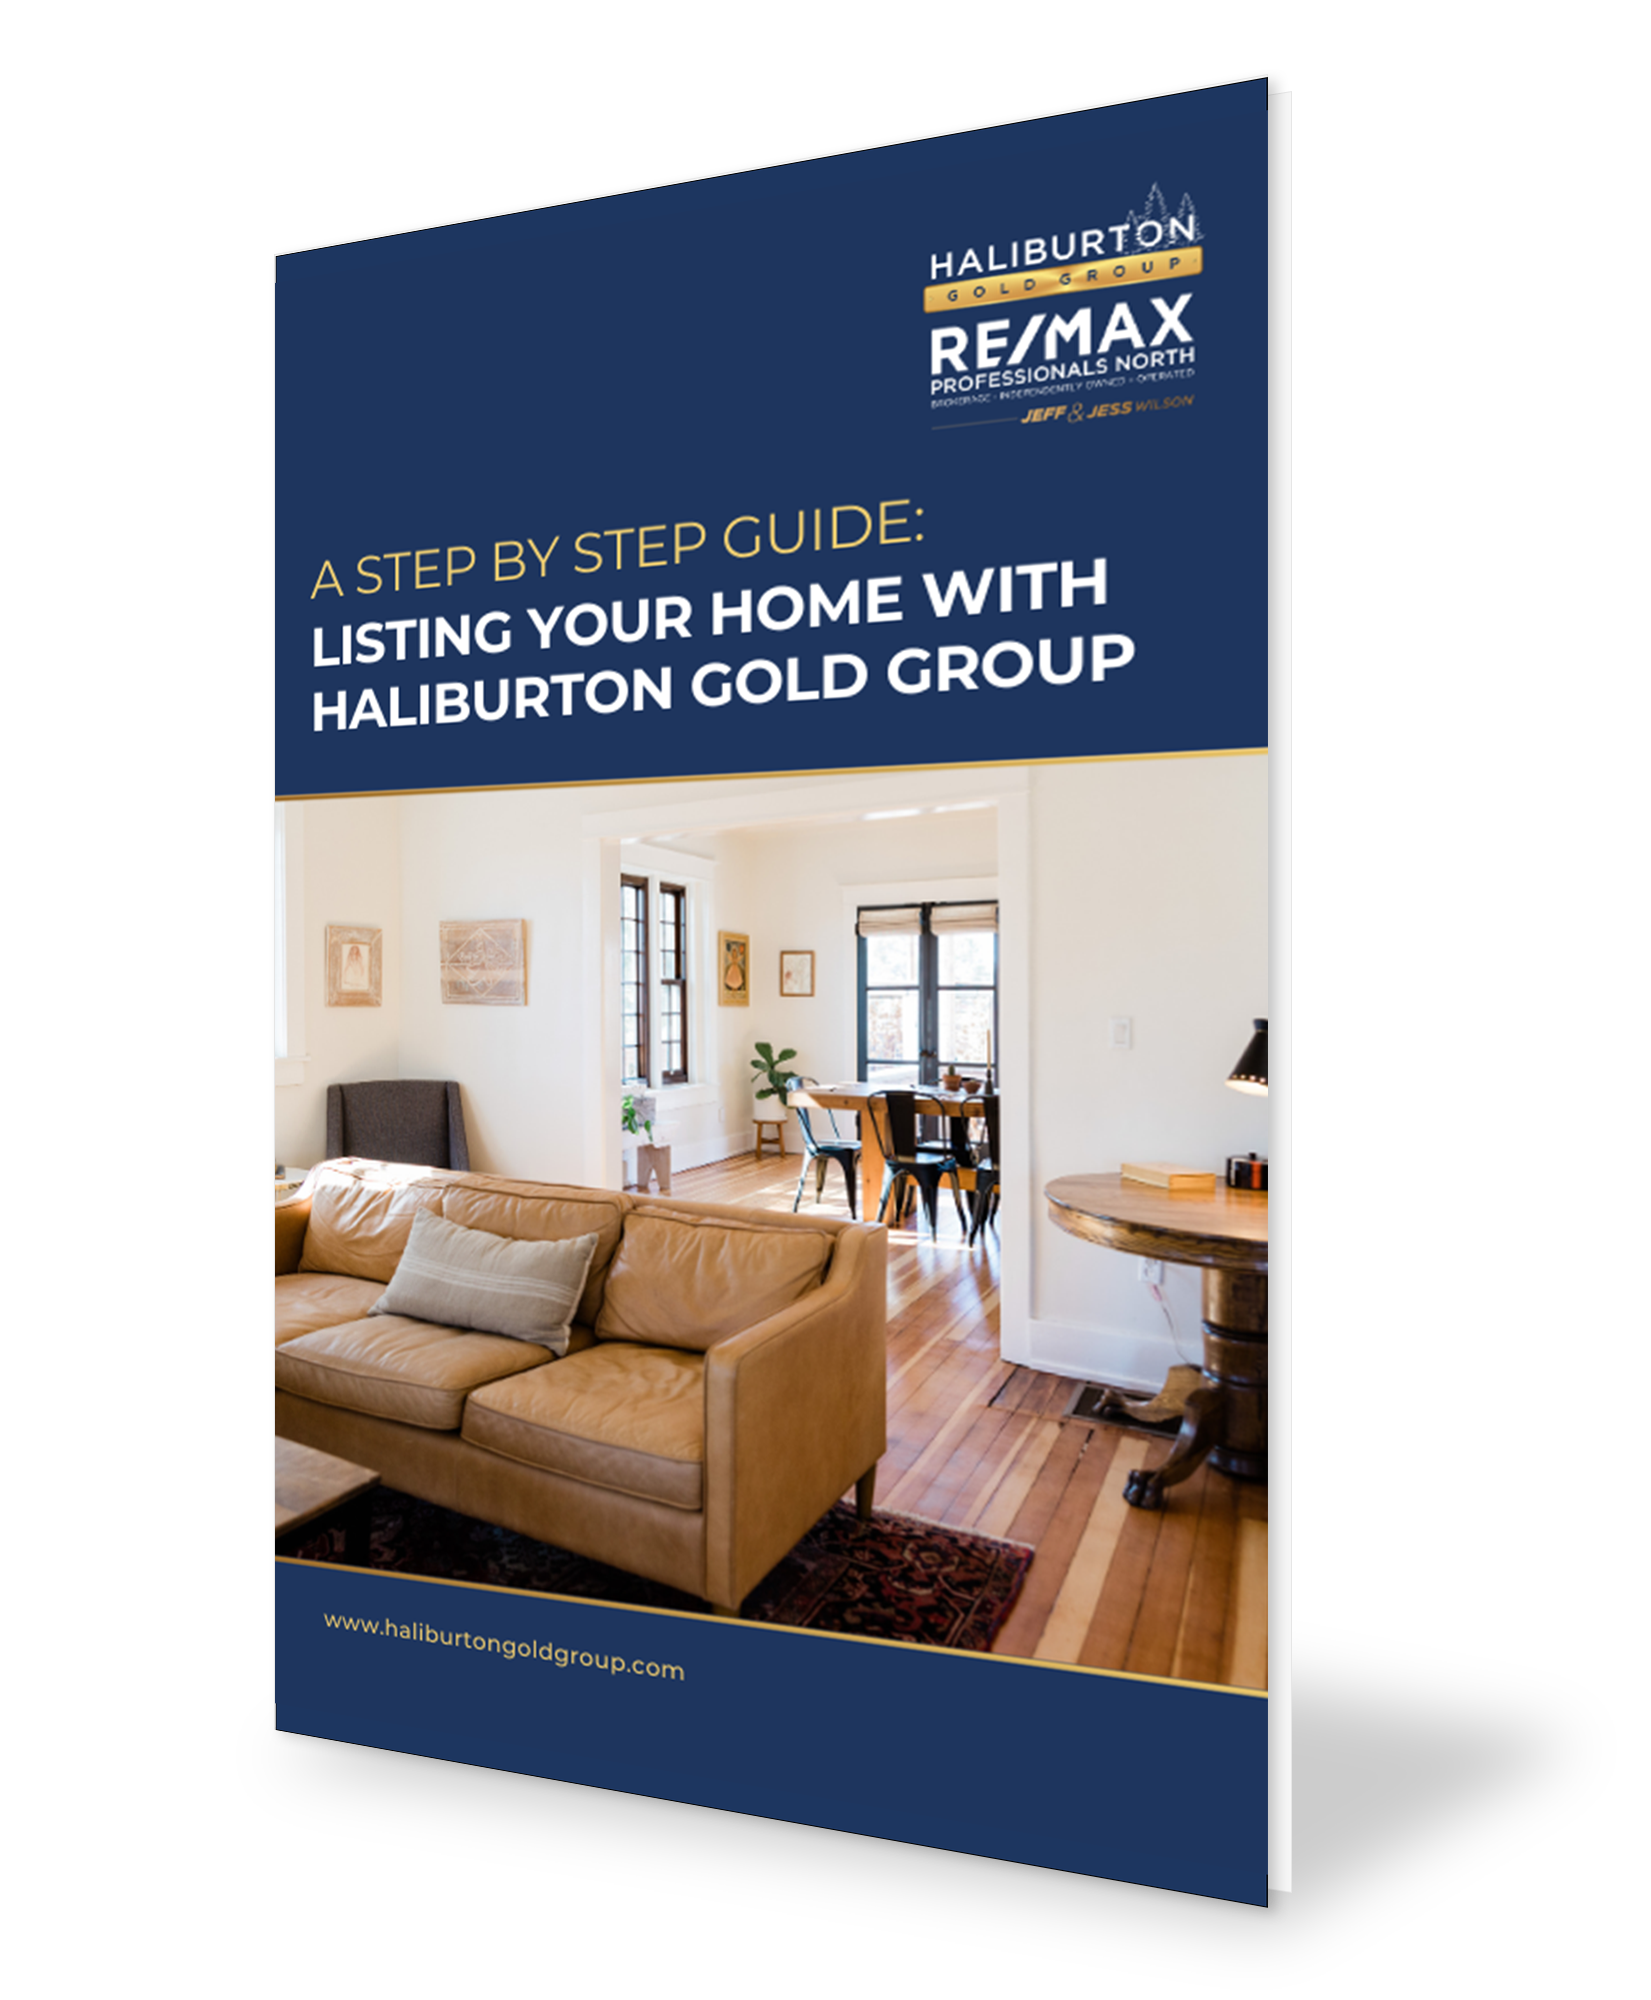 A step by step guide to listing your home with haliburton gold group